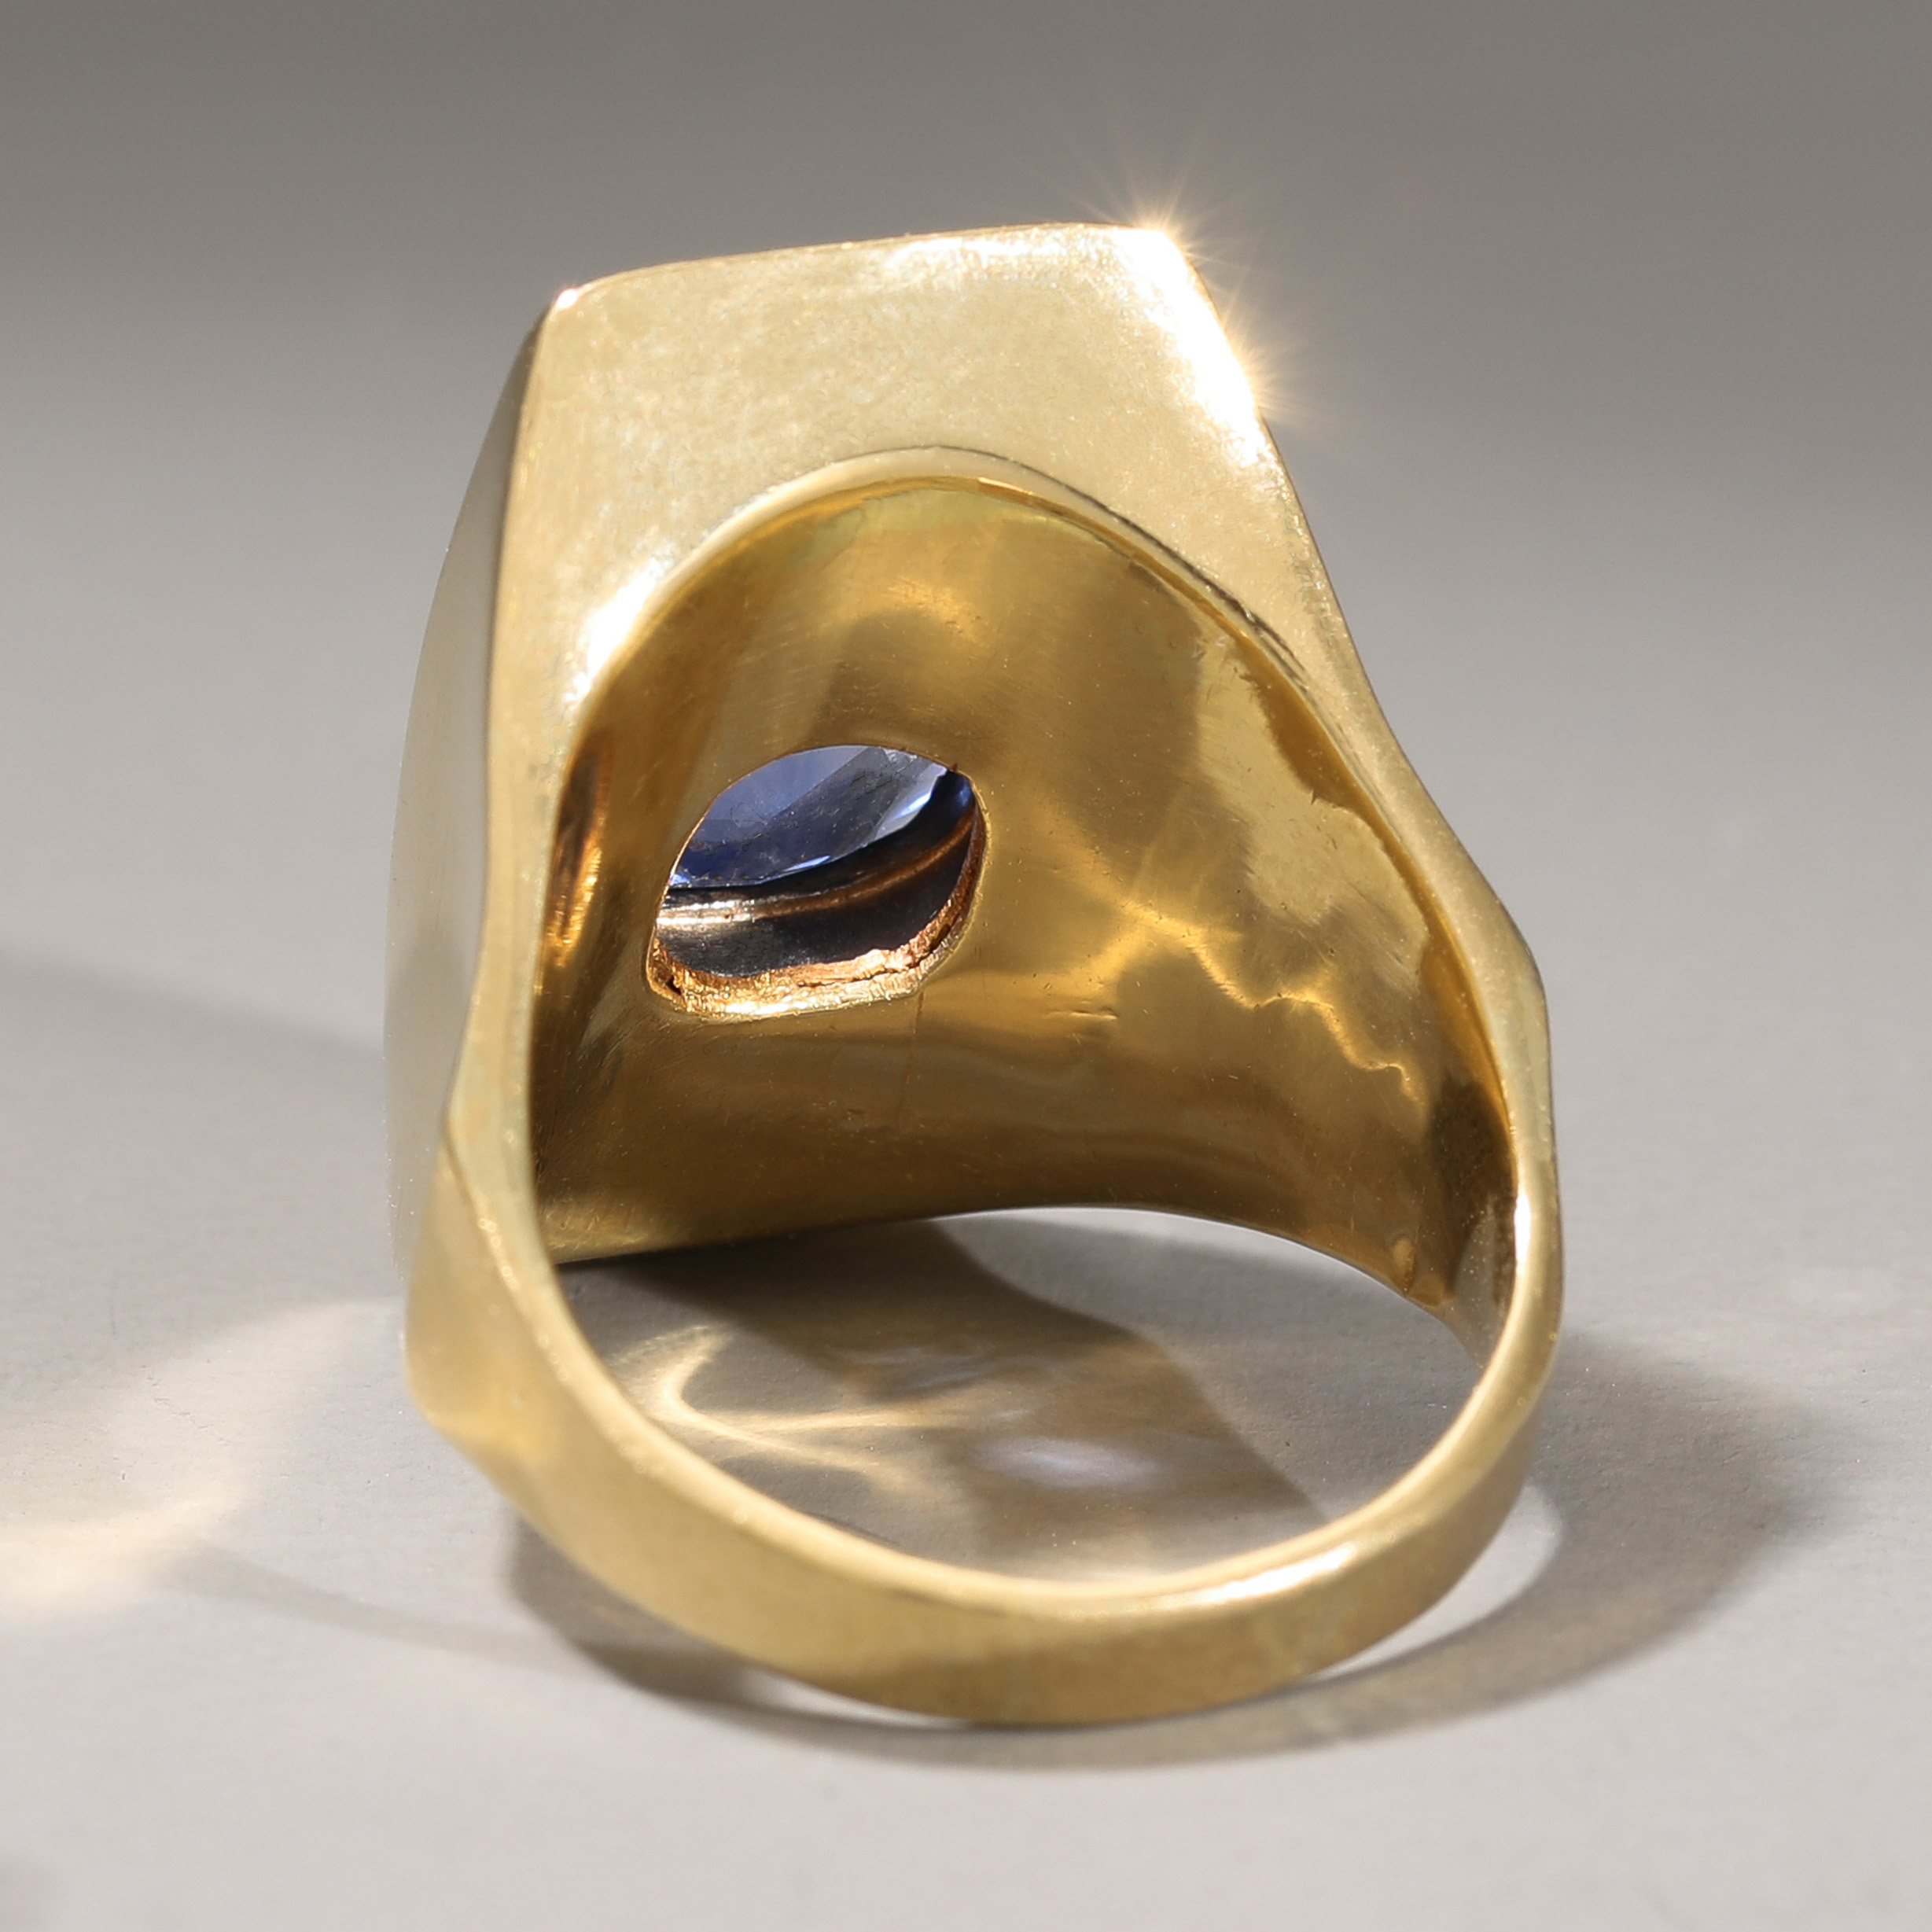 Germany, sapphire ring - Image 6 of 7